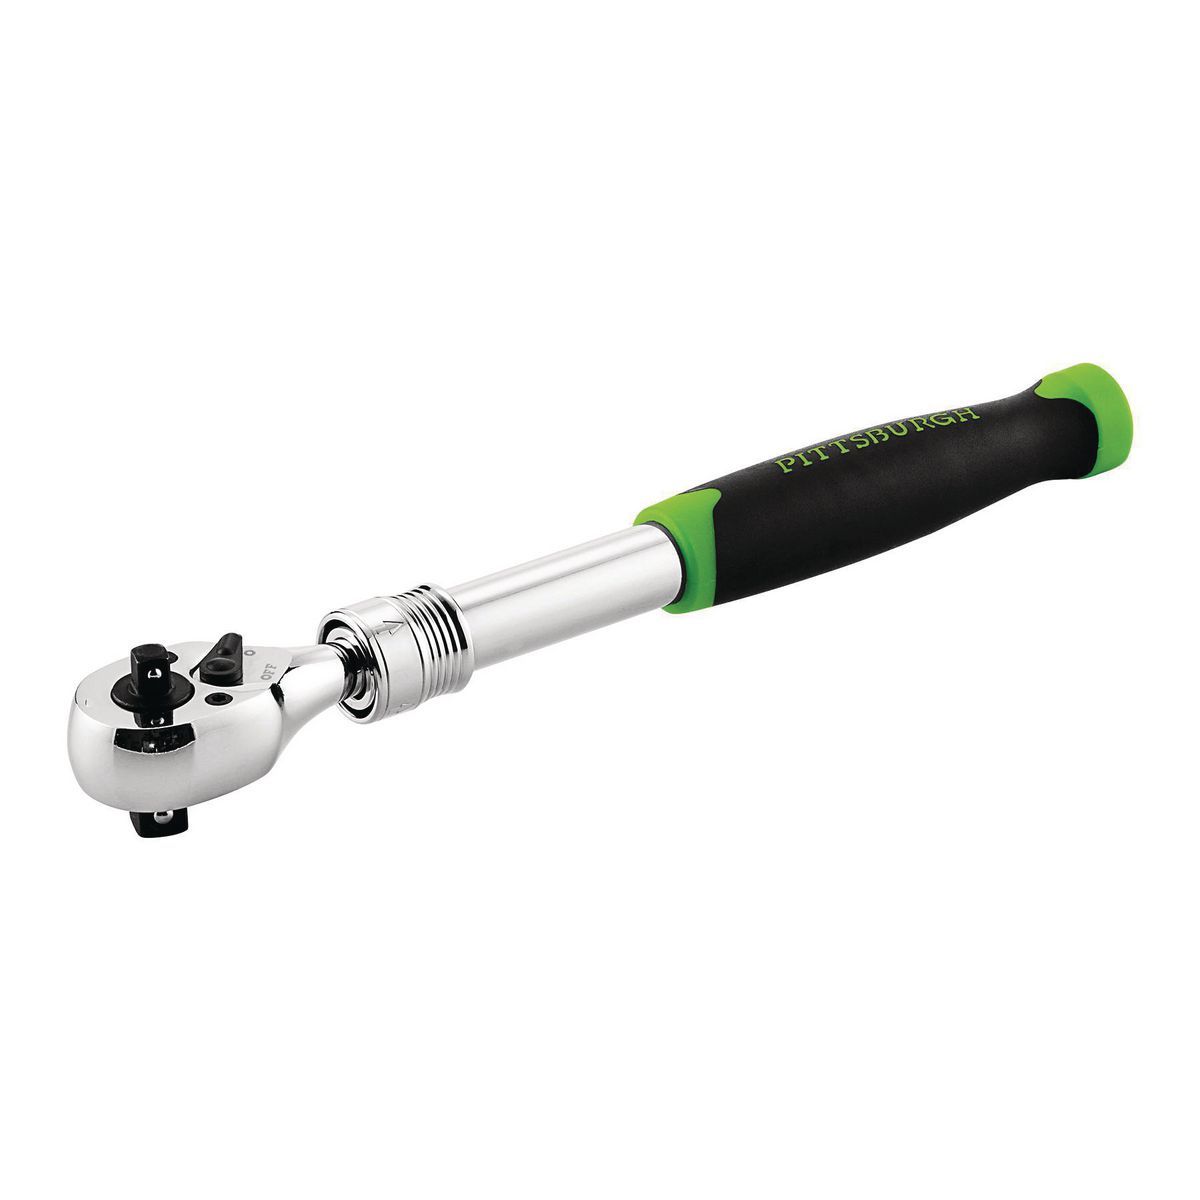 1/4 in. x 3/8 in. Dual-Drive Extendable Ratchet